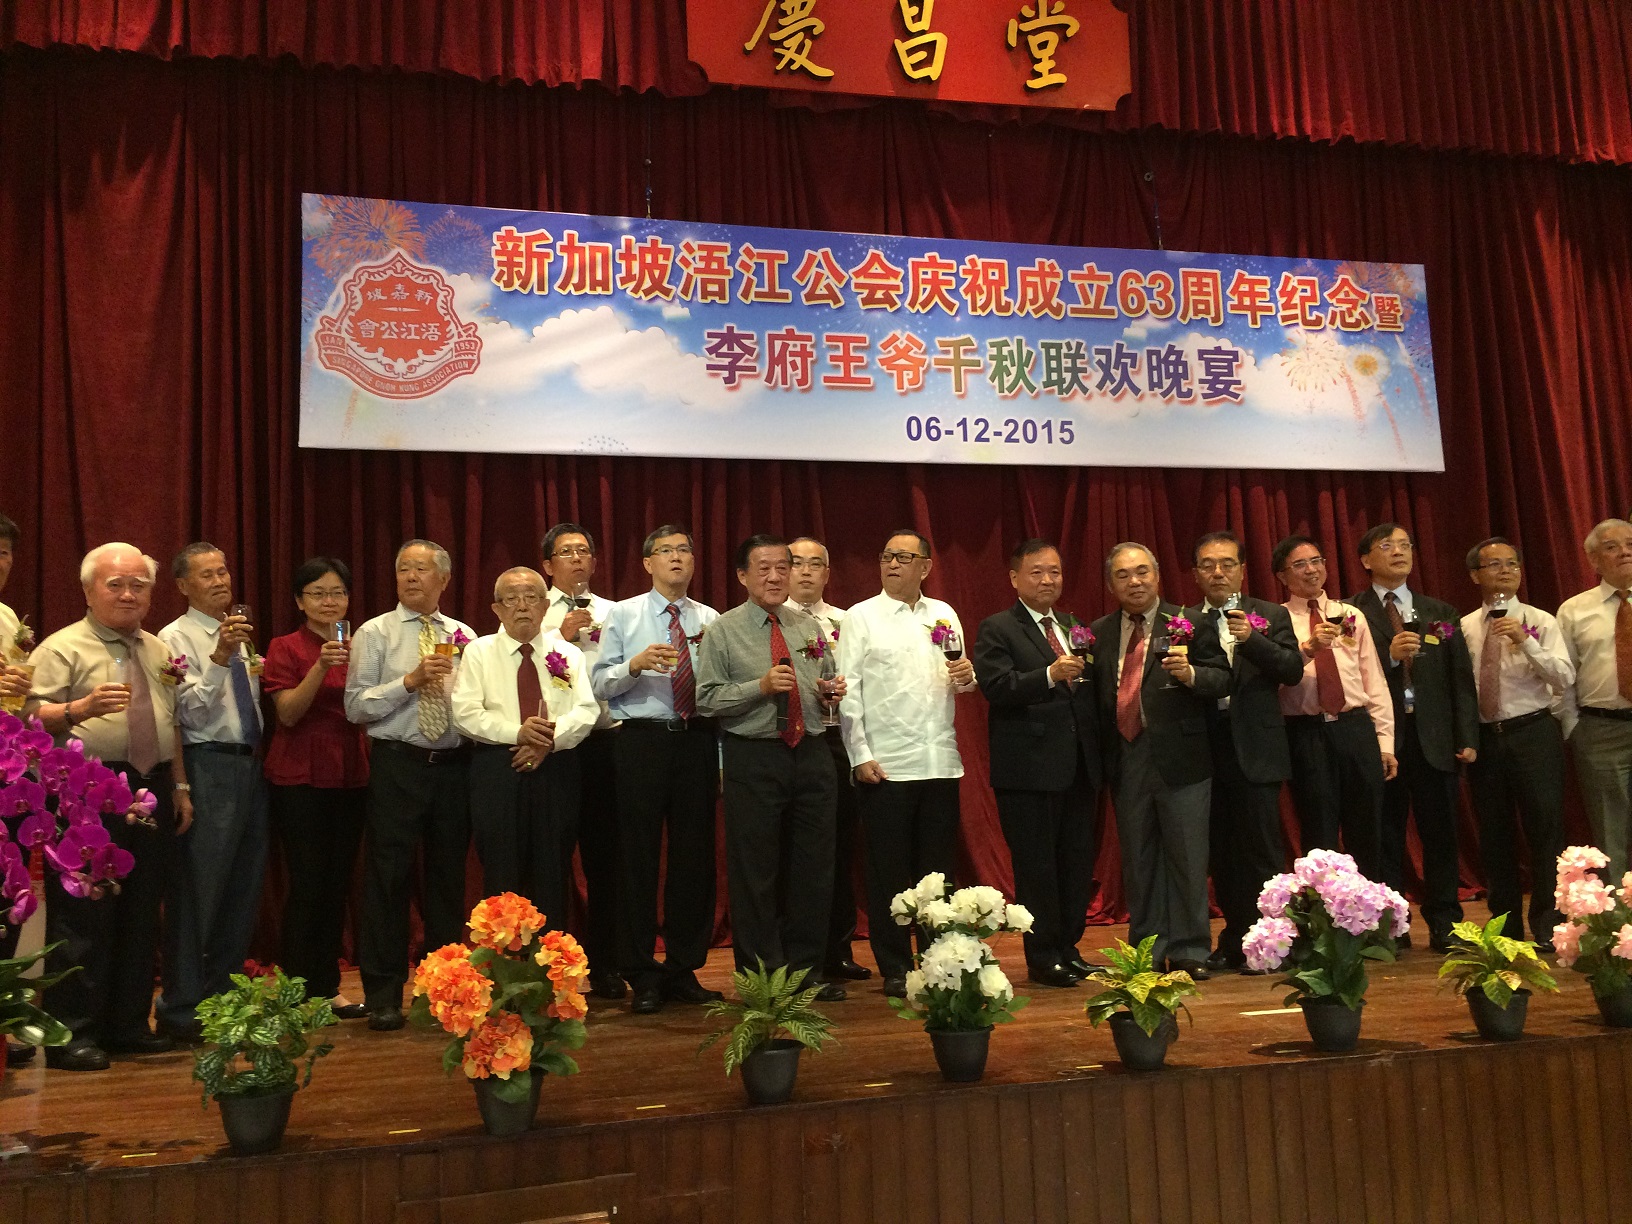 Representative Ta-Tung Jacob Chang; Mr. Li Zhiyuan, President of the Singapore Gnoh Kung Association; and association committee members offering a toast to attendees at the 63rd Anniversary Dinner.